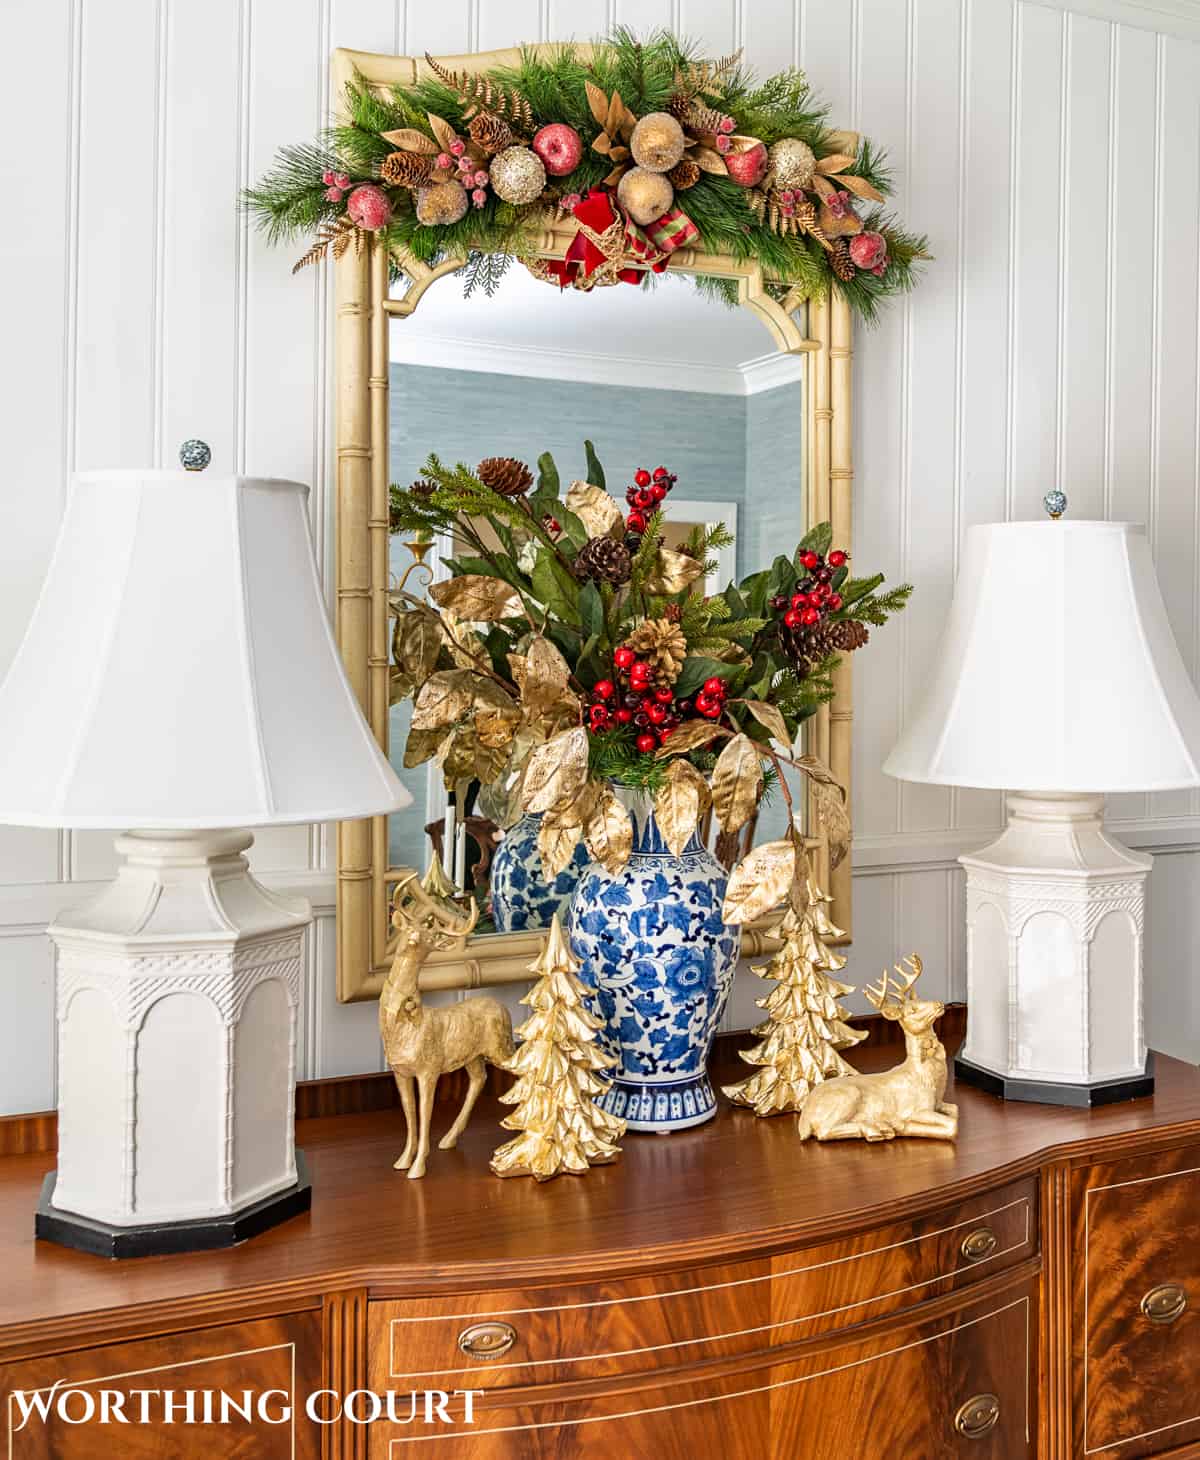 Christmas vignette on a sideboard with burgundy and gold stems in a blue and white vase flanked by gold deer and gold Christmas trees